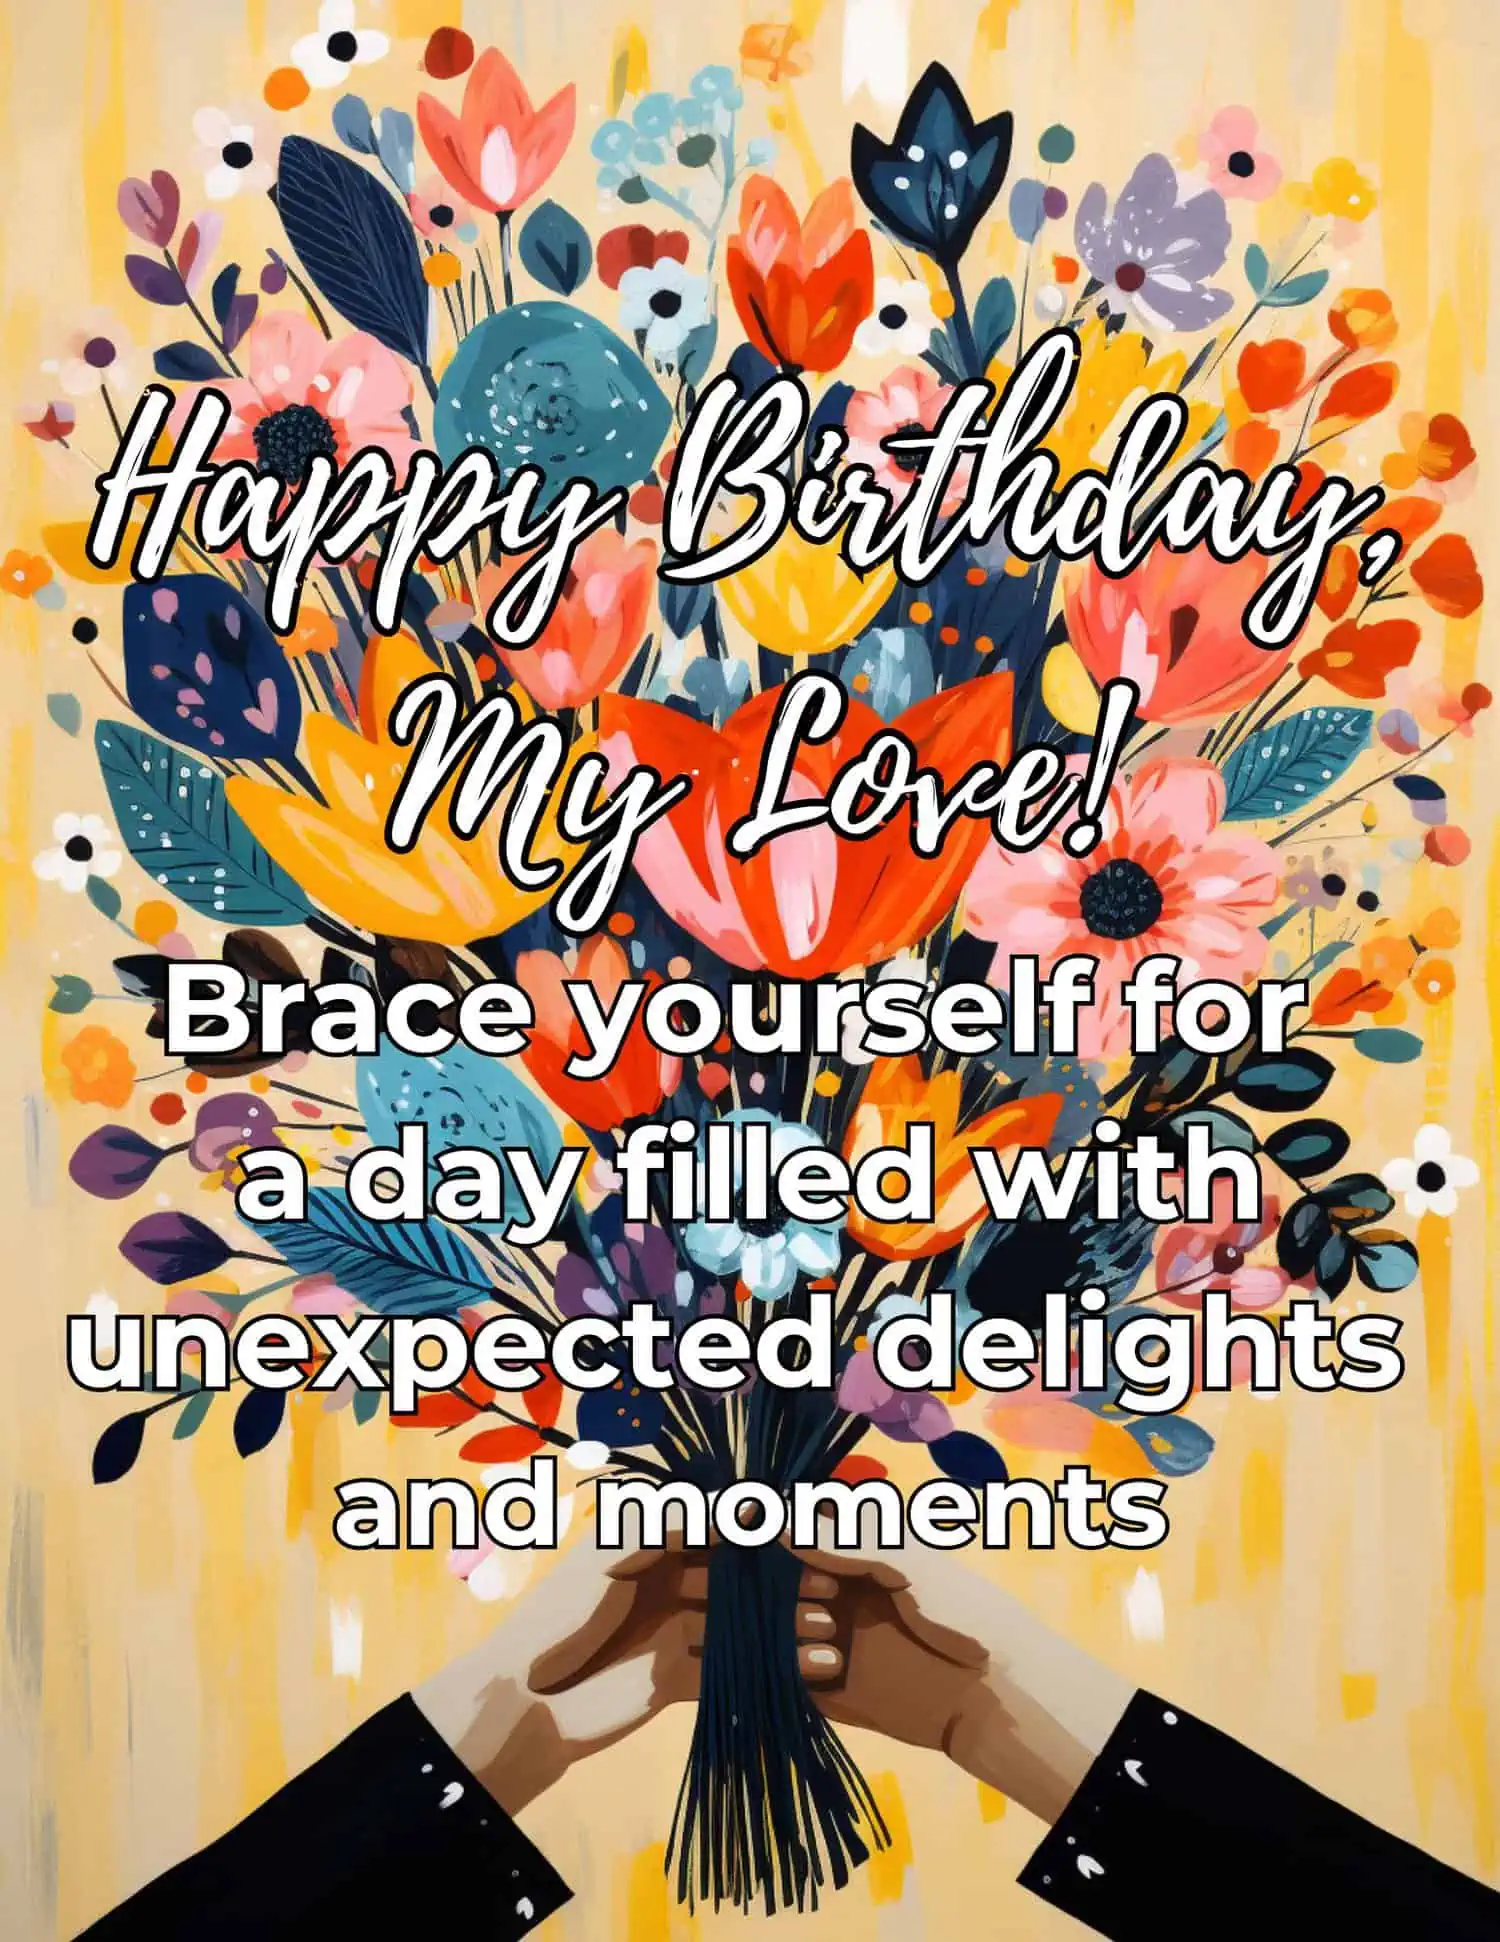 Unexpected and heartwarming birthday messages for your significant other.